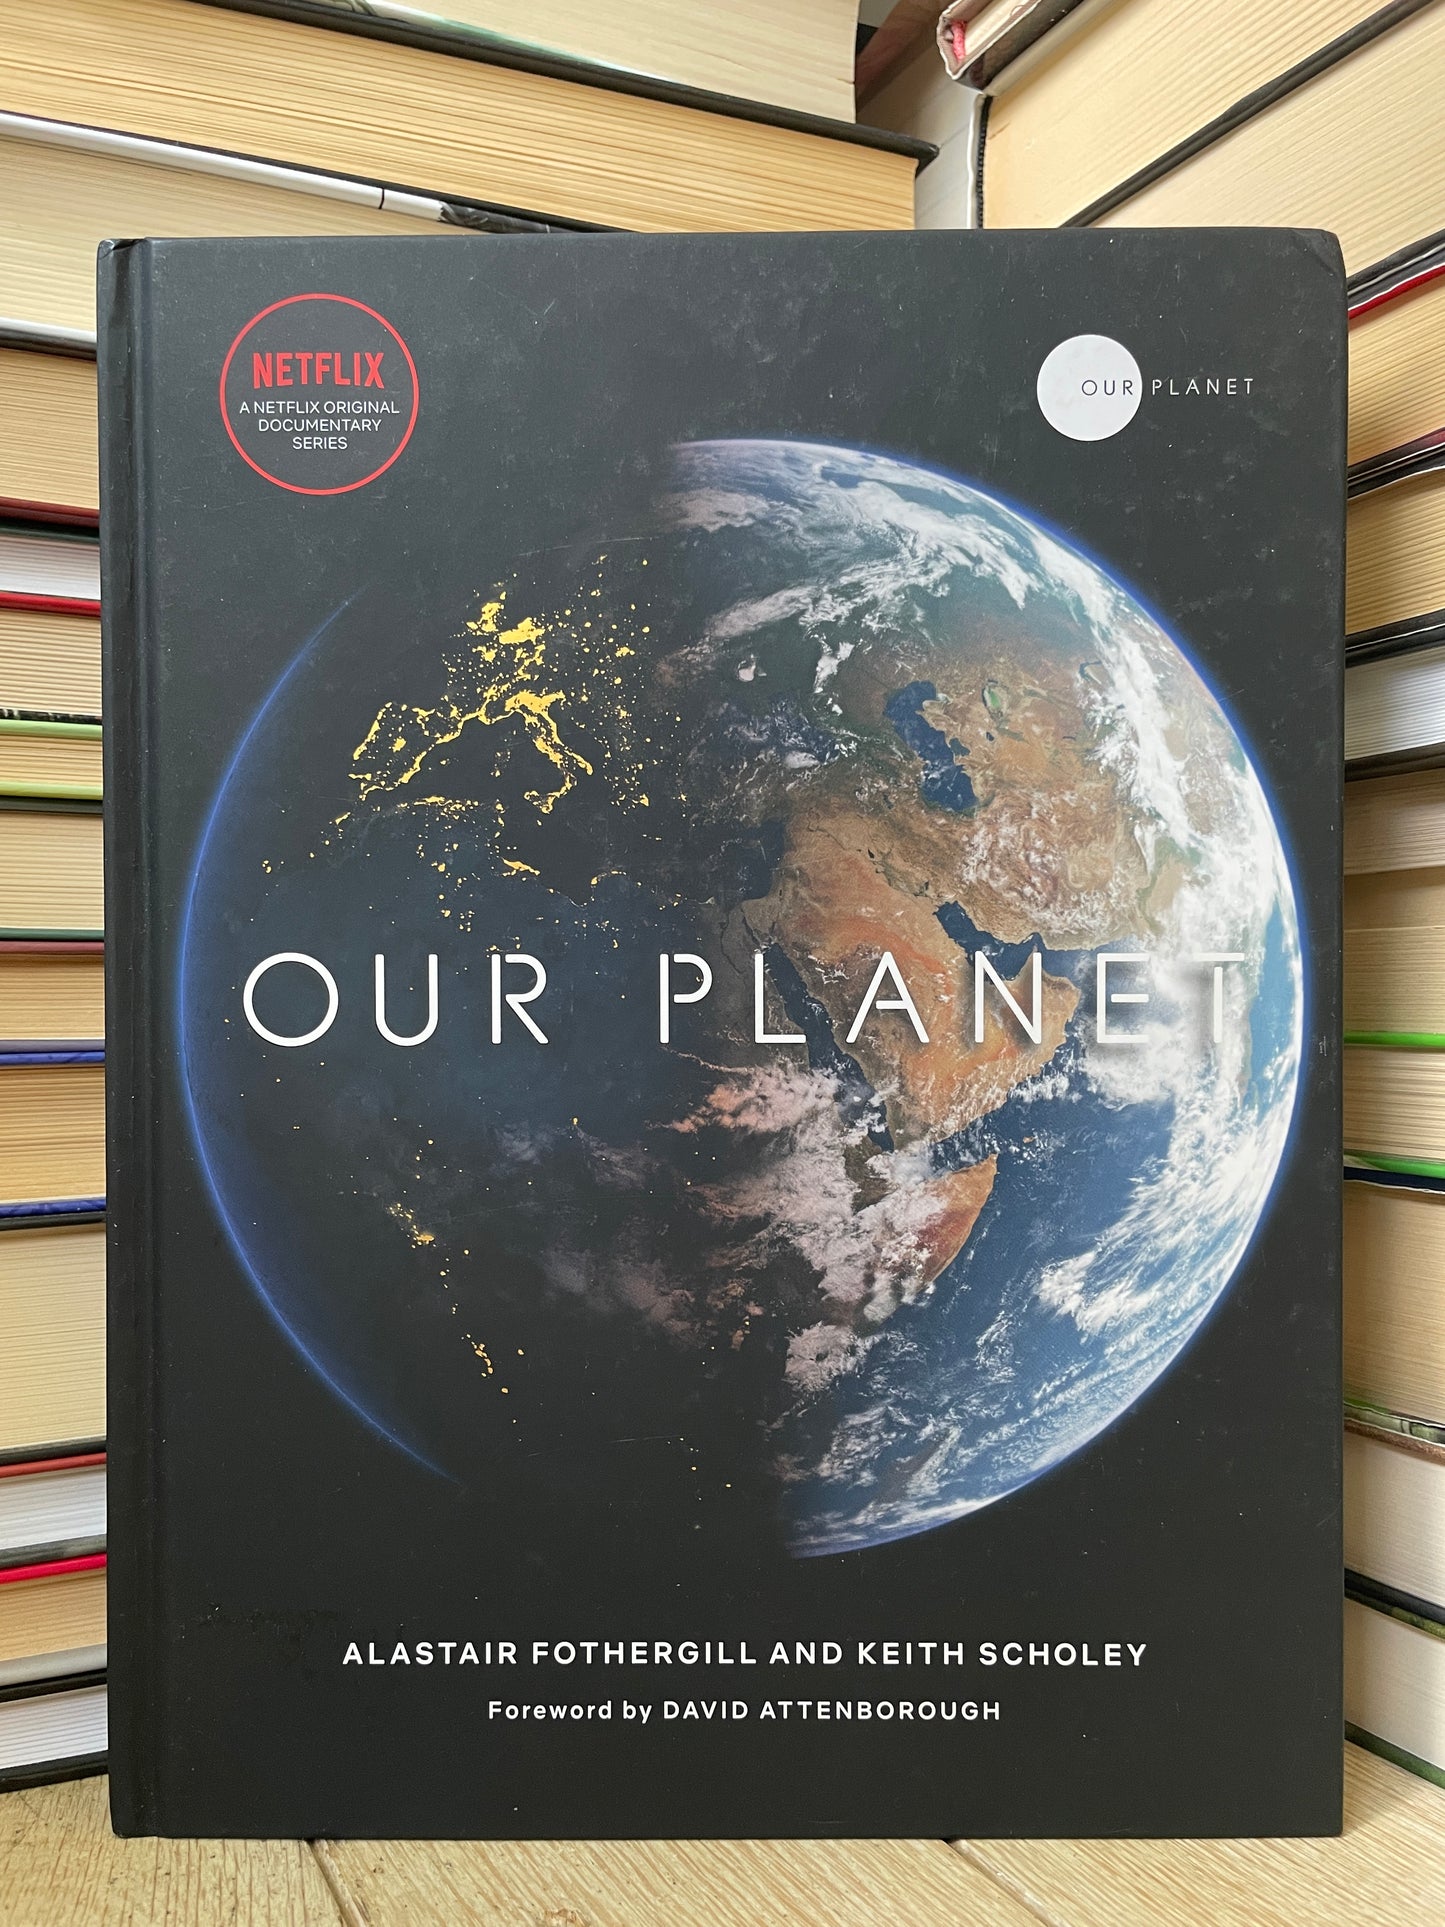 Alastair Fothergill - Our Planet